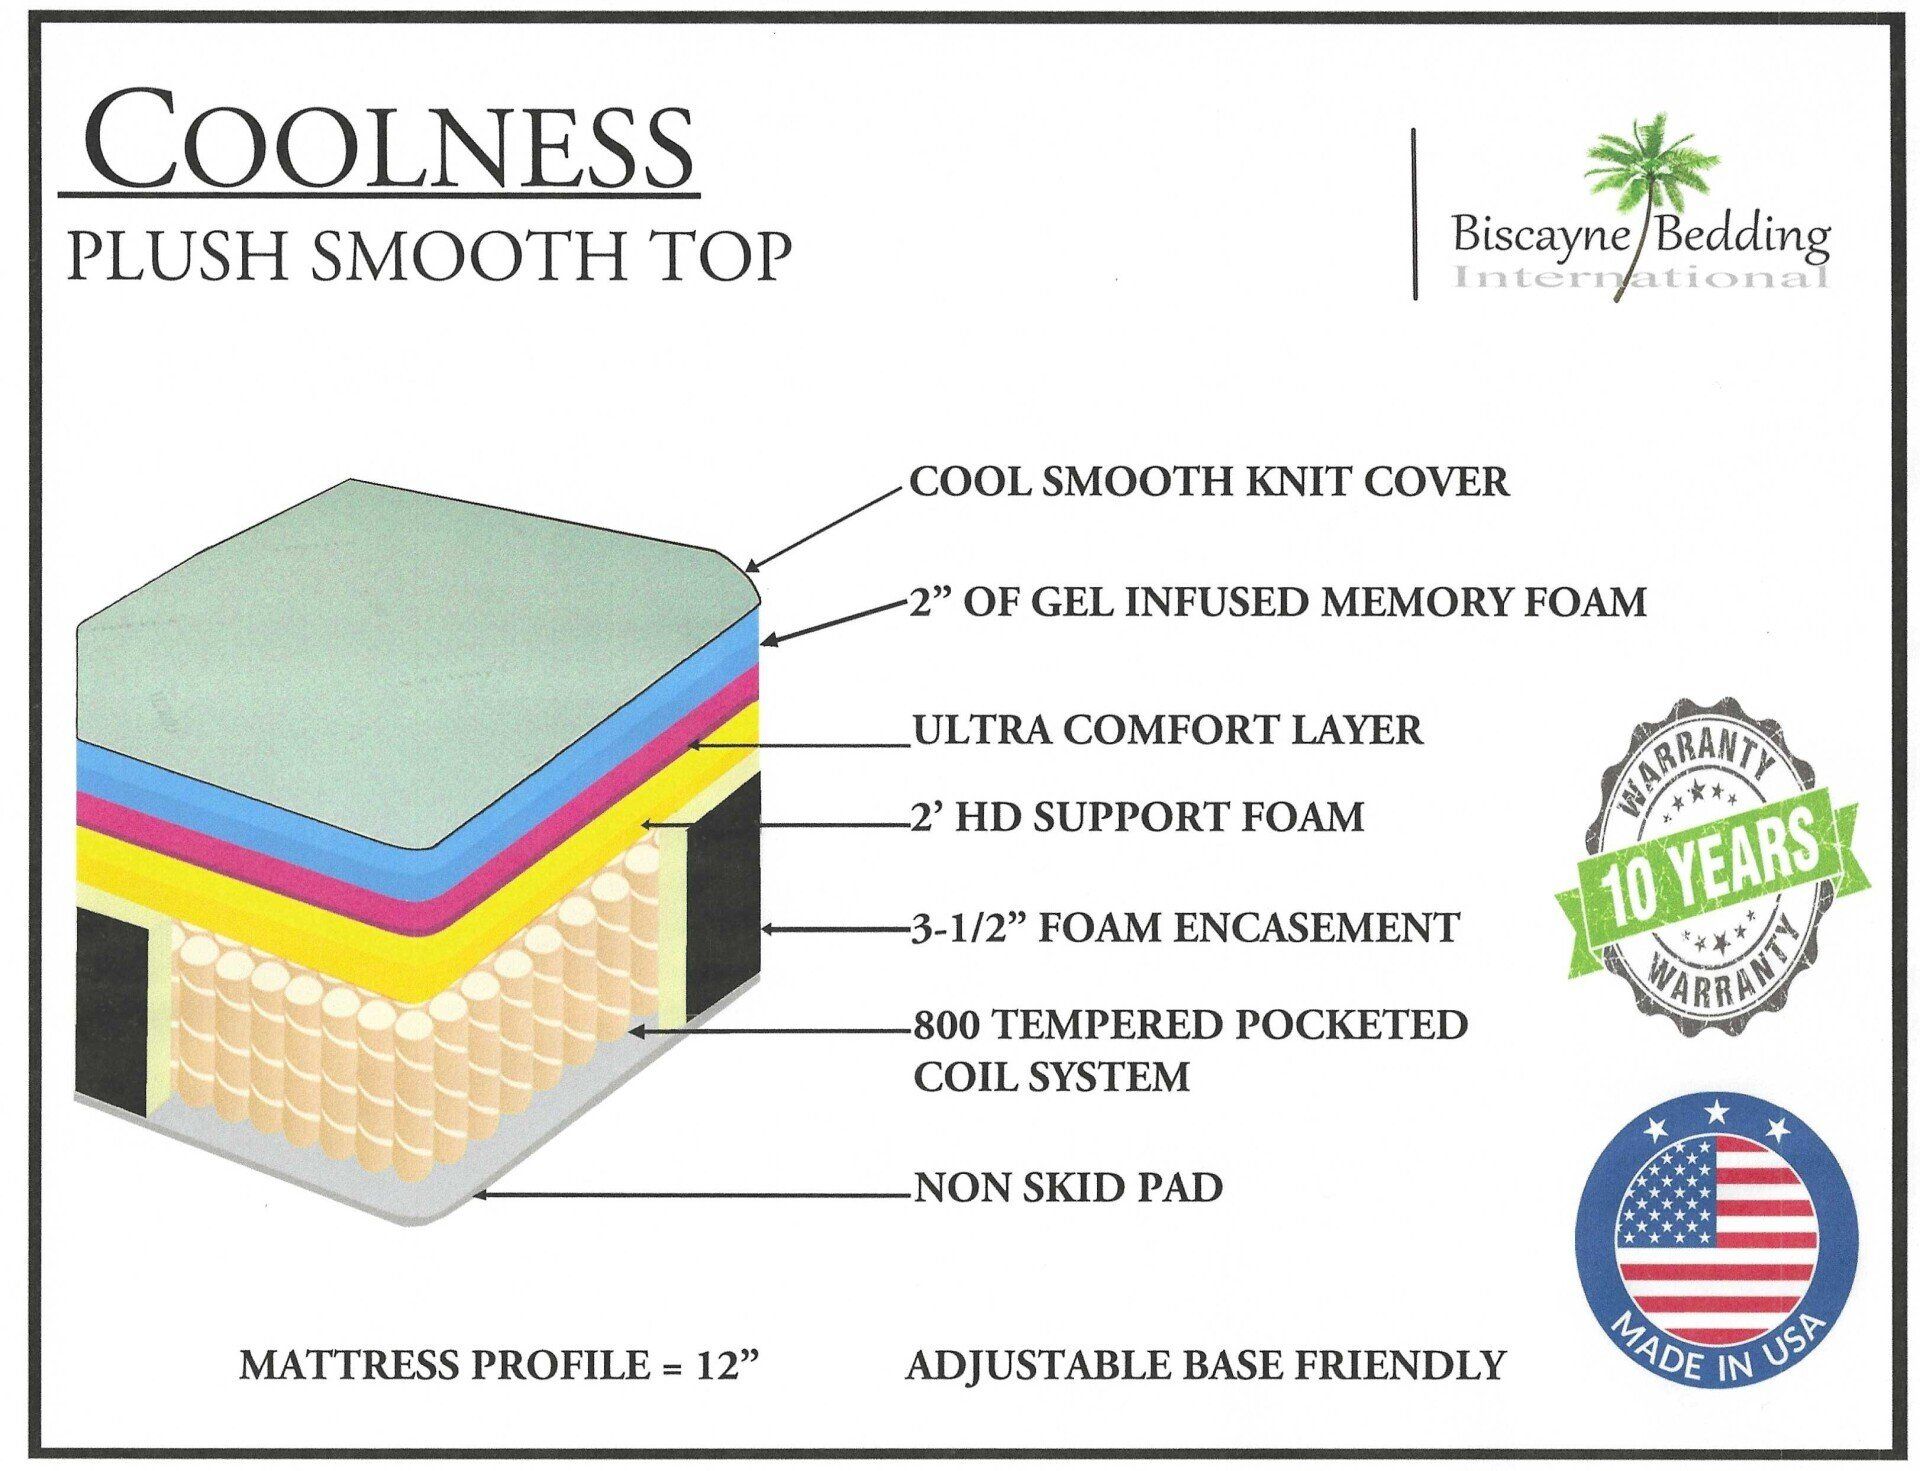 The Coolness Smooth Top mattress by Biscayne Bedding can be found at Bratz-CFW located in Fort Myers, FL. Spec sheet.